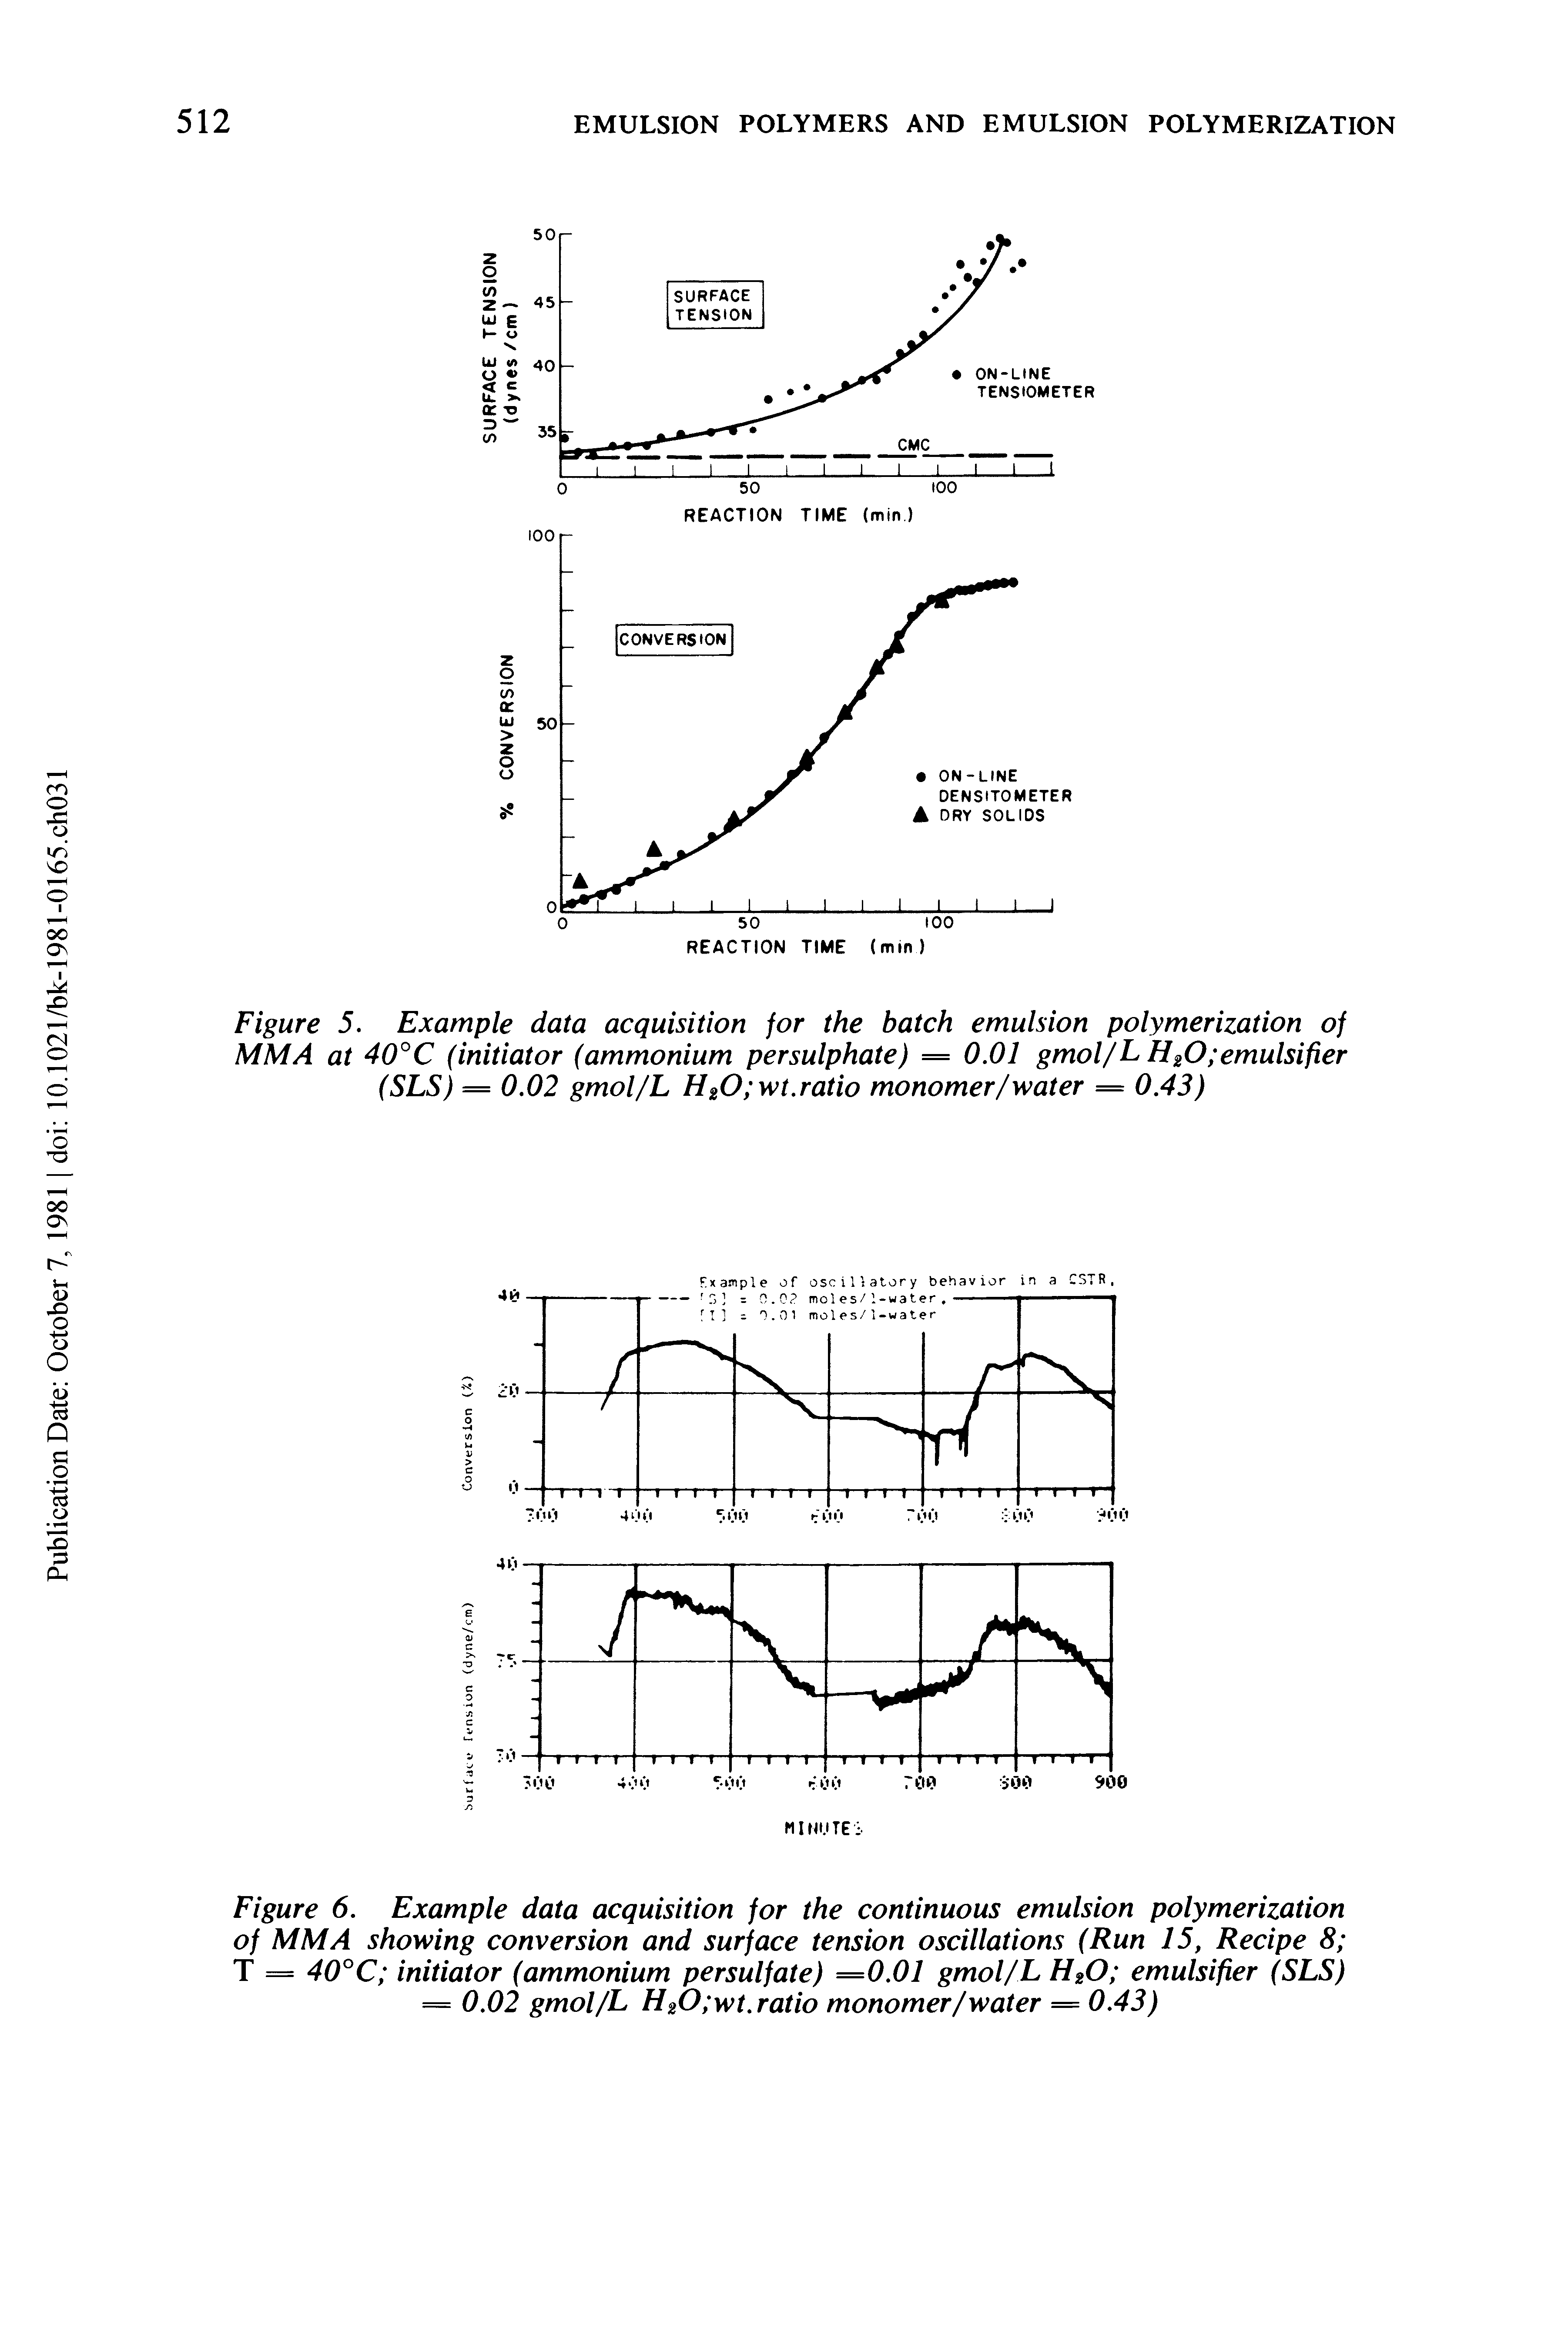 Figure 5. Example data acquisition for the batch emulsion polymerization of MM A at 40°C (initiator (ammonium persulphate) = 0.01 gmol/L H20 emulsifier (SLS) = 0.02 gmol/L H20 wt.ratio monomer /water = 0.43)...